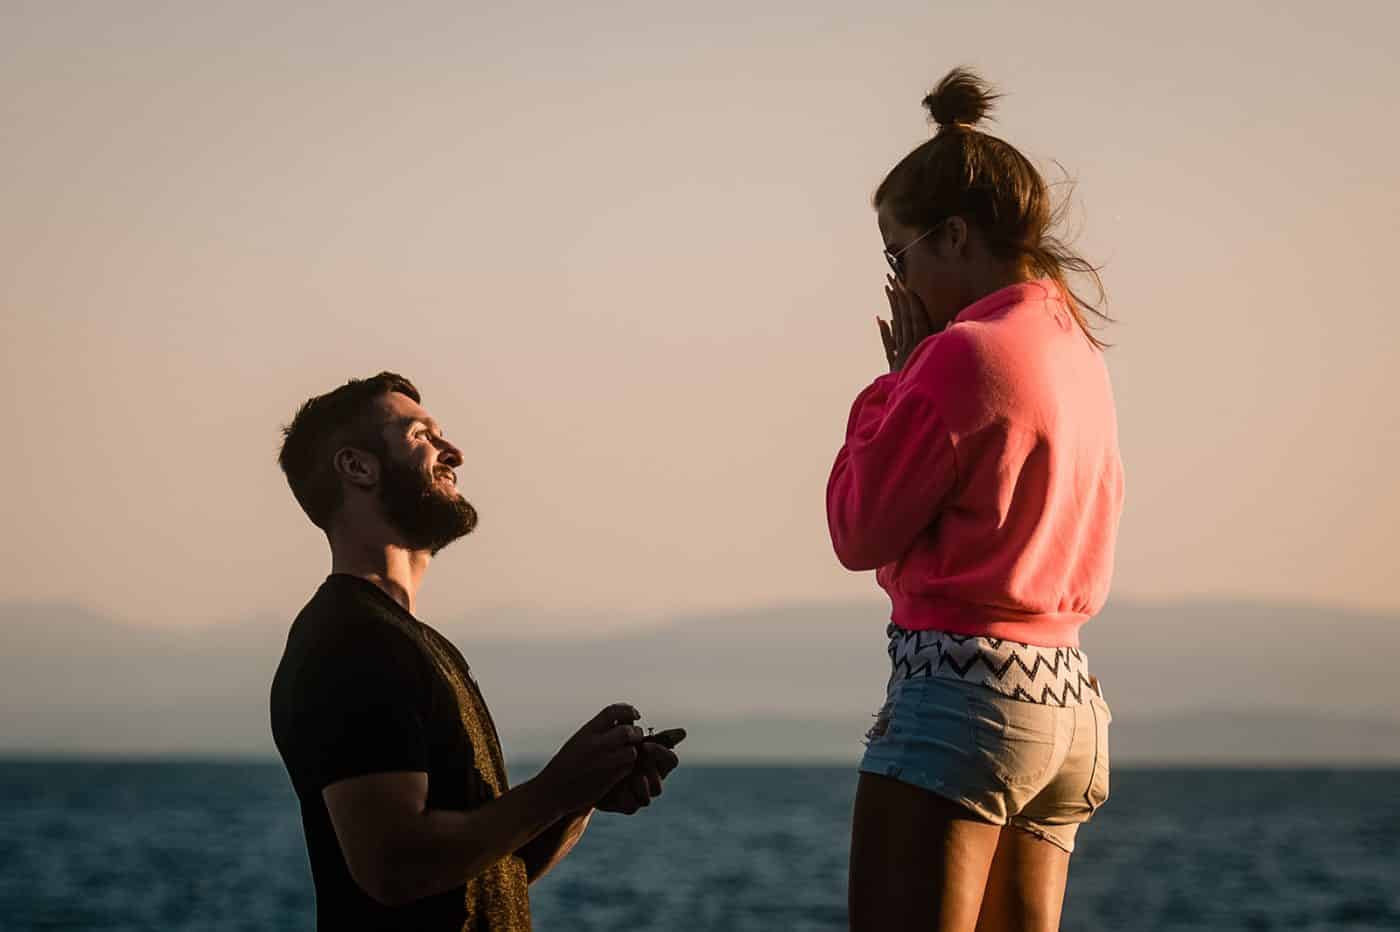 man proposes to his girlfriend on the beach in Sechelt at sunset.